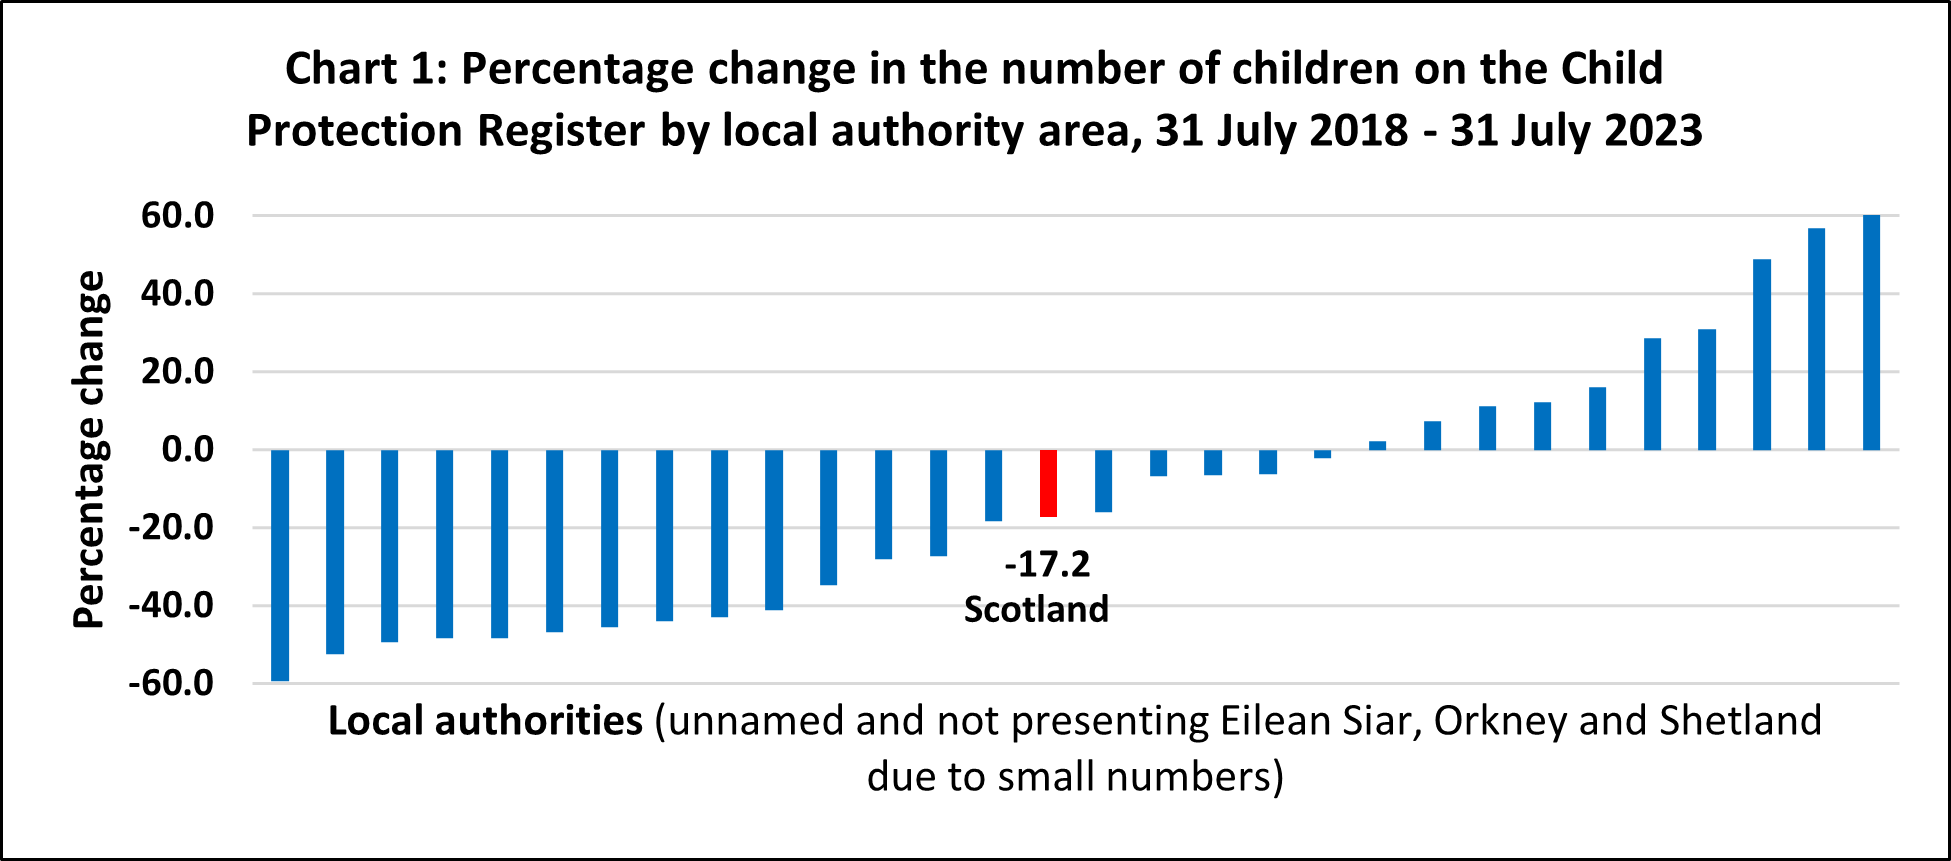 A chart showing the percentage change in the number of children on the Child Protection Register by local authority area, 31 July 2018 to 31 July 2023